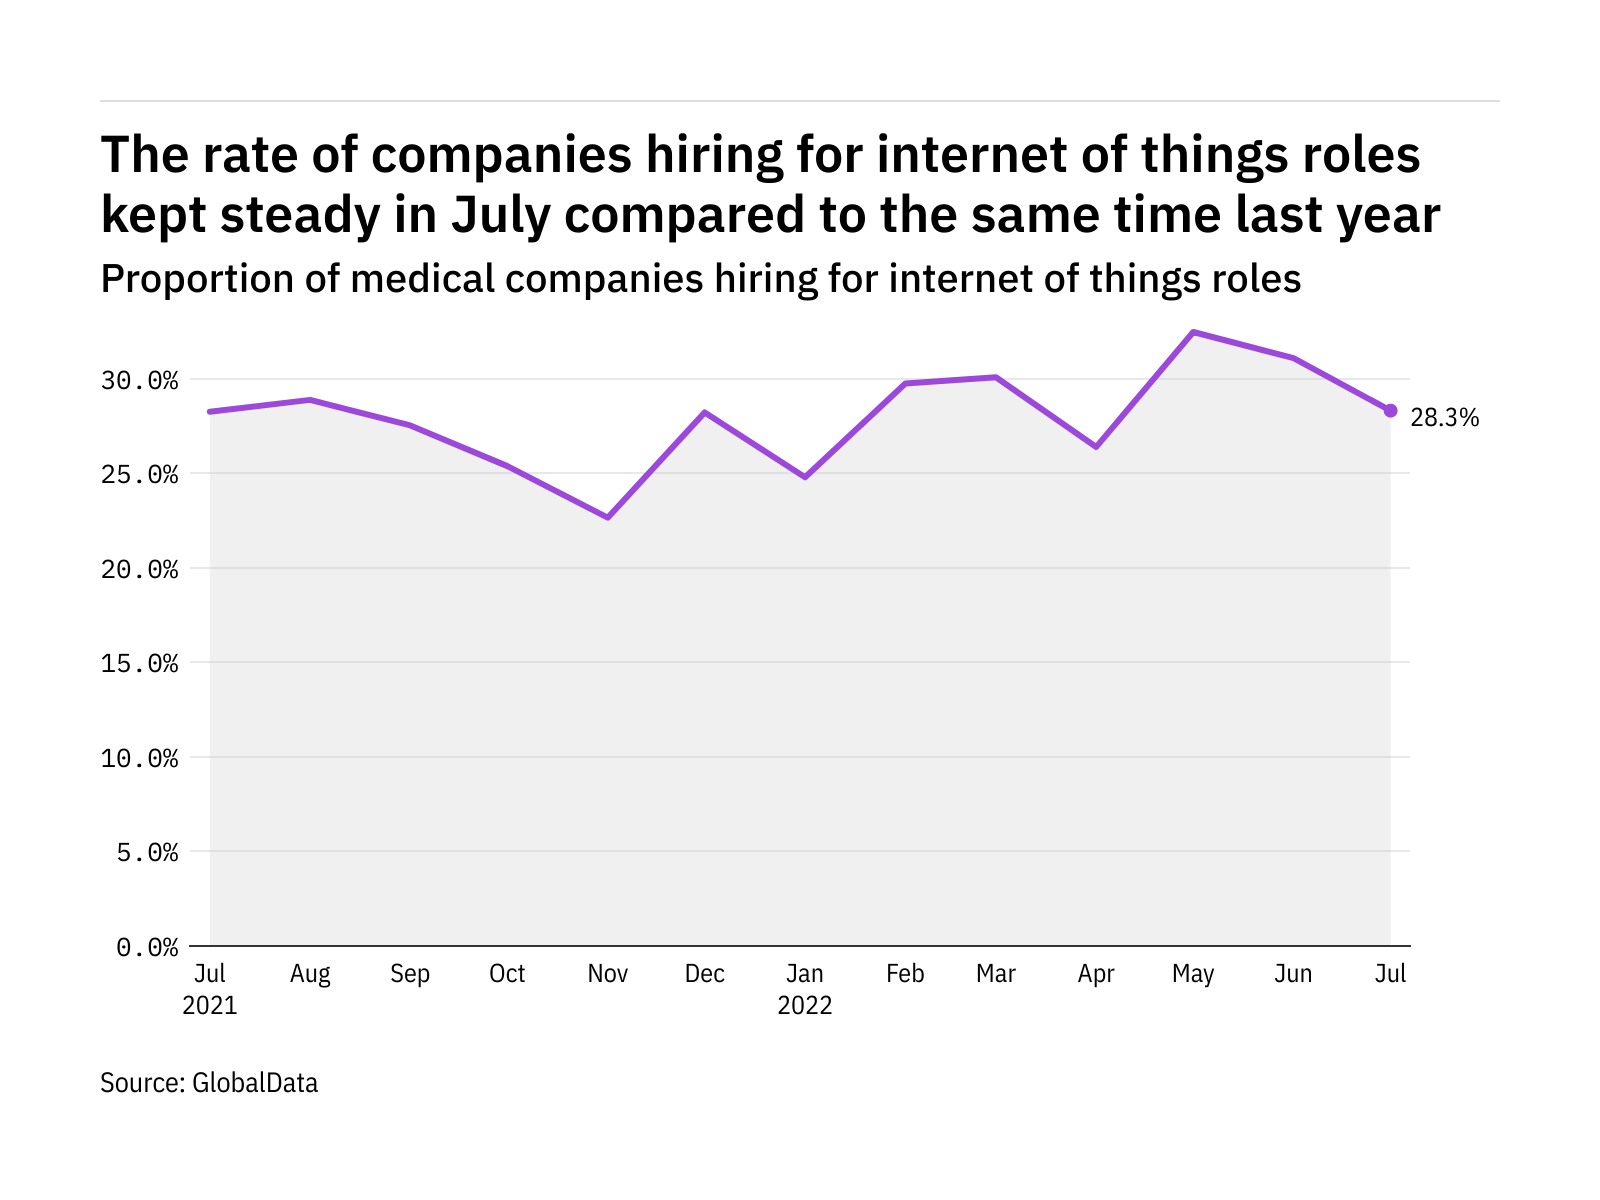 Internet of things hiring in the medical industry steady in July 2022